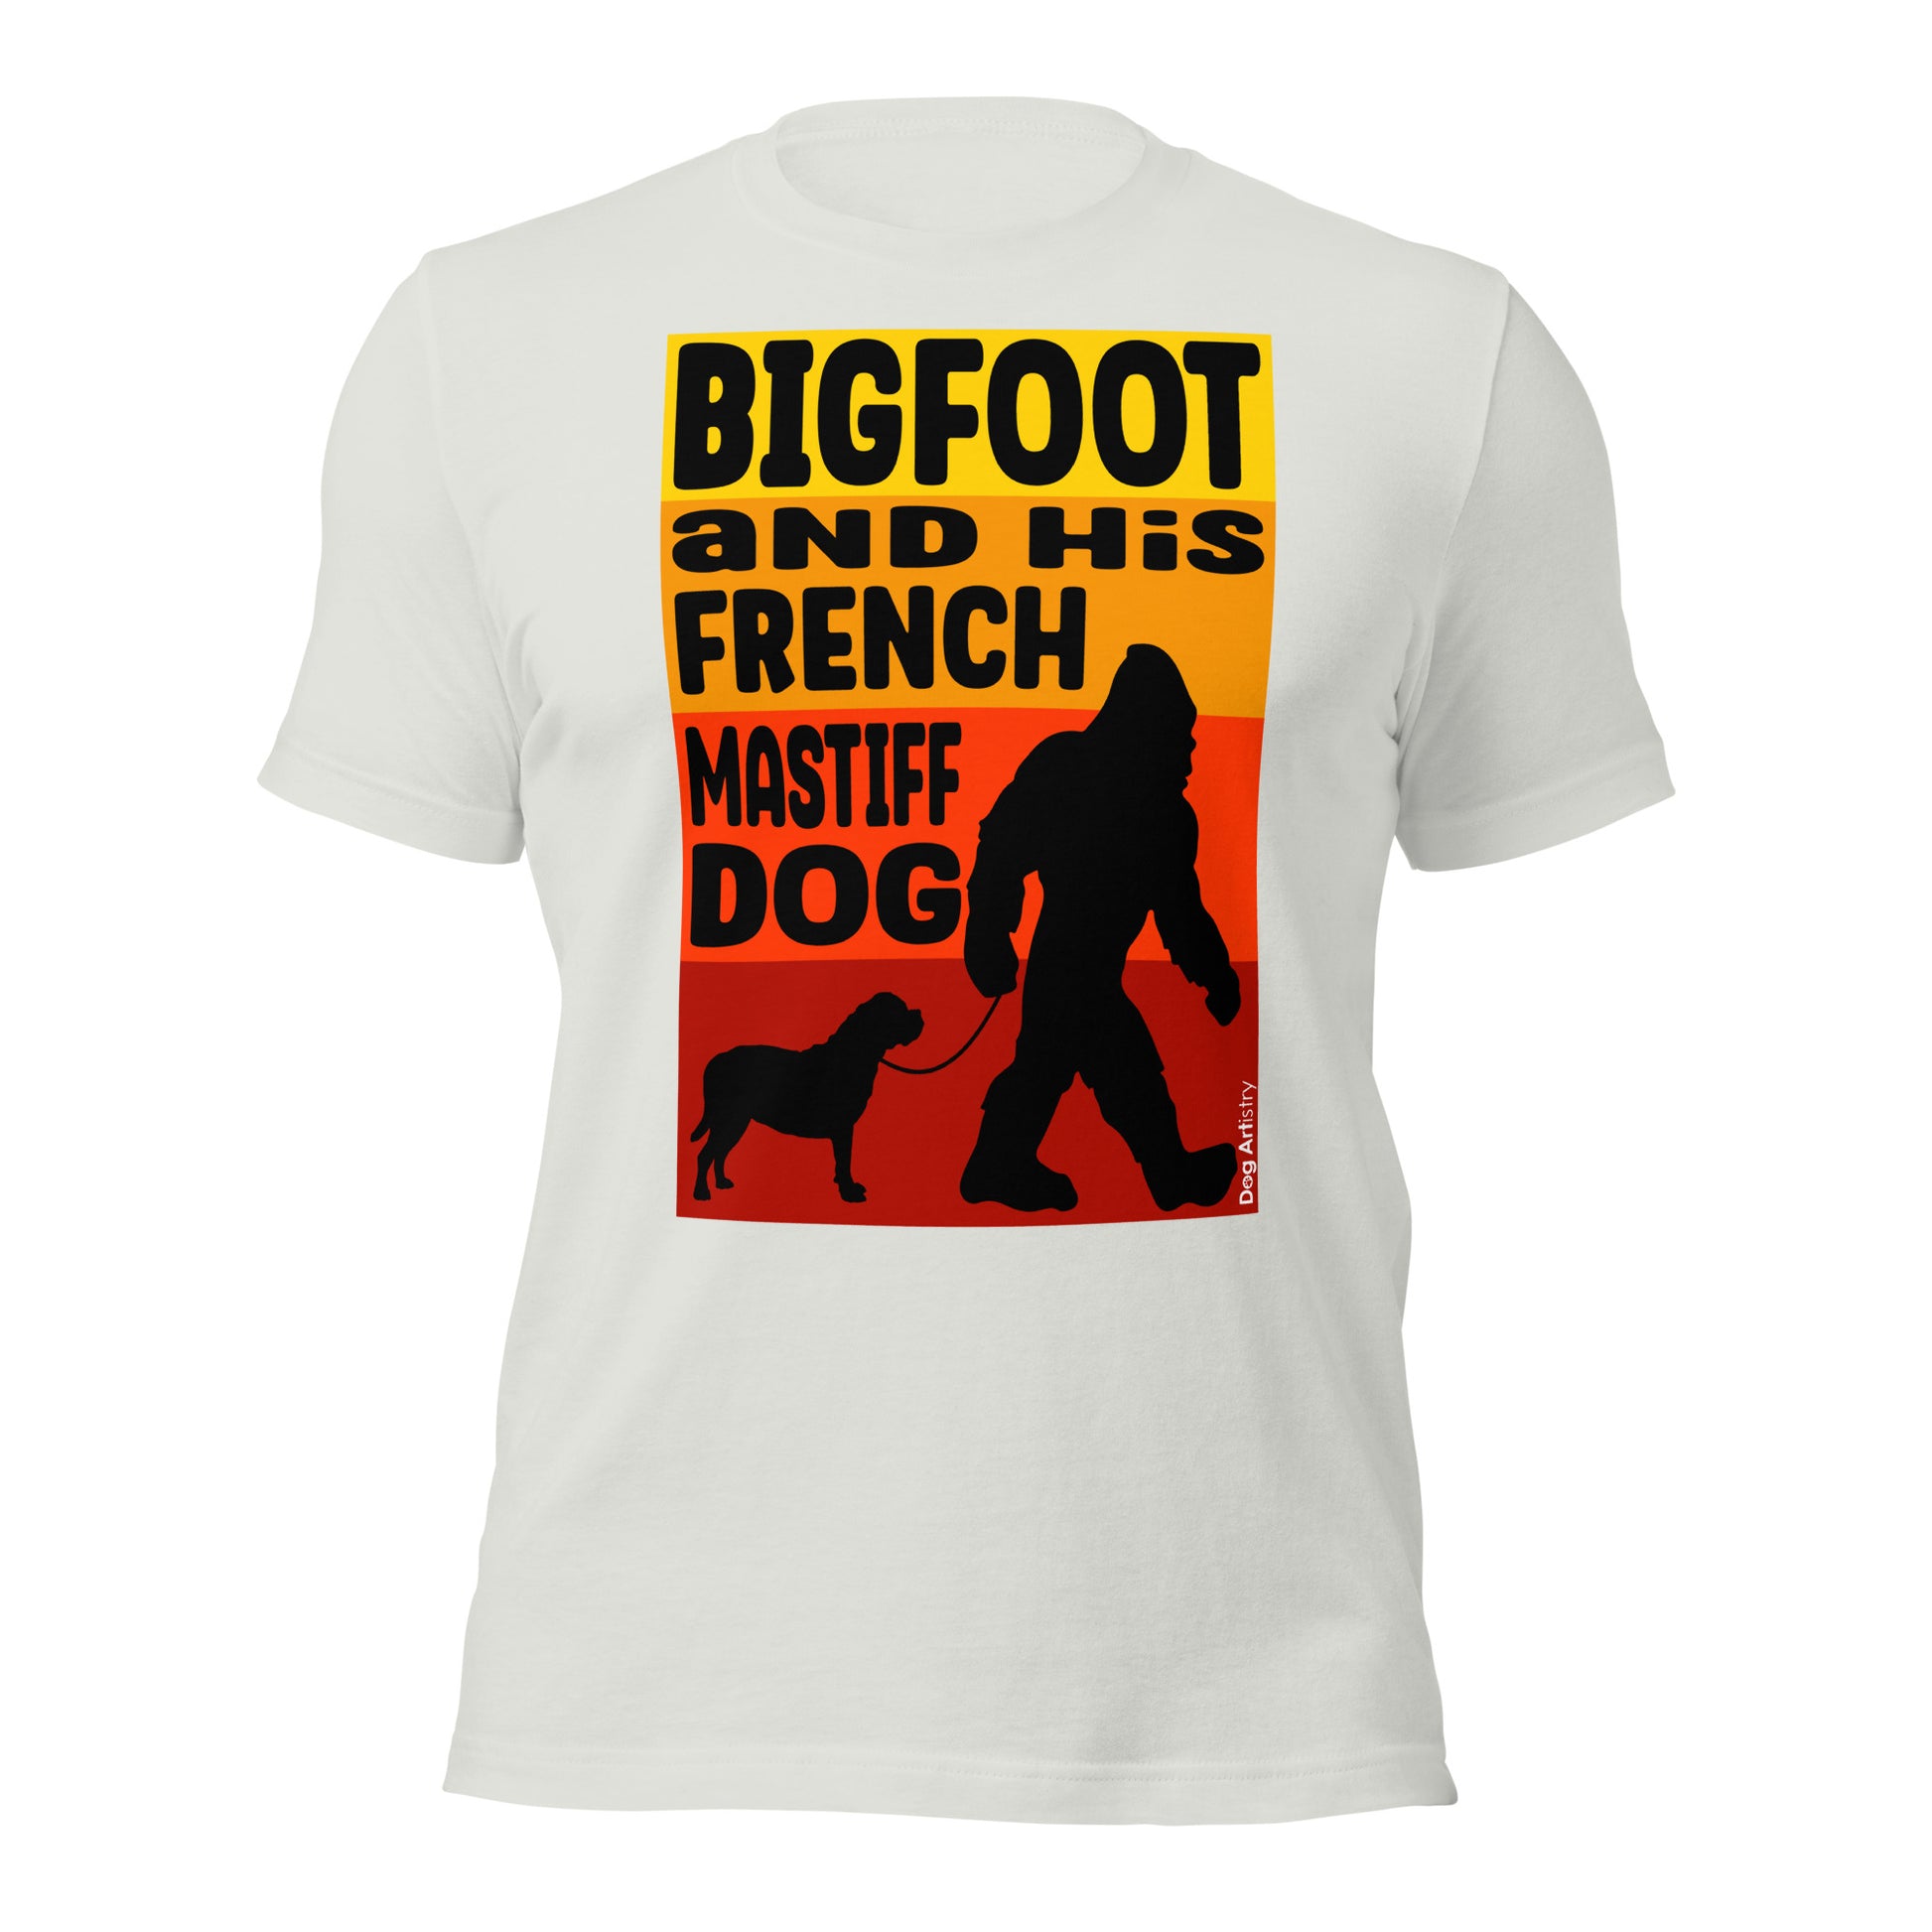 Bigfoot and his French Mastiff unisex silver t-shirt by Dog Artistry.